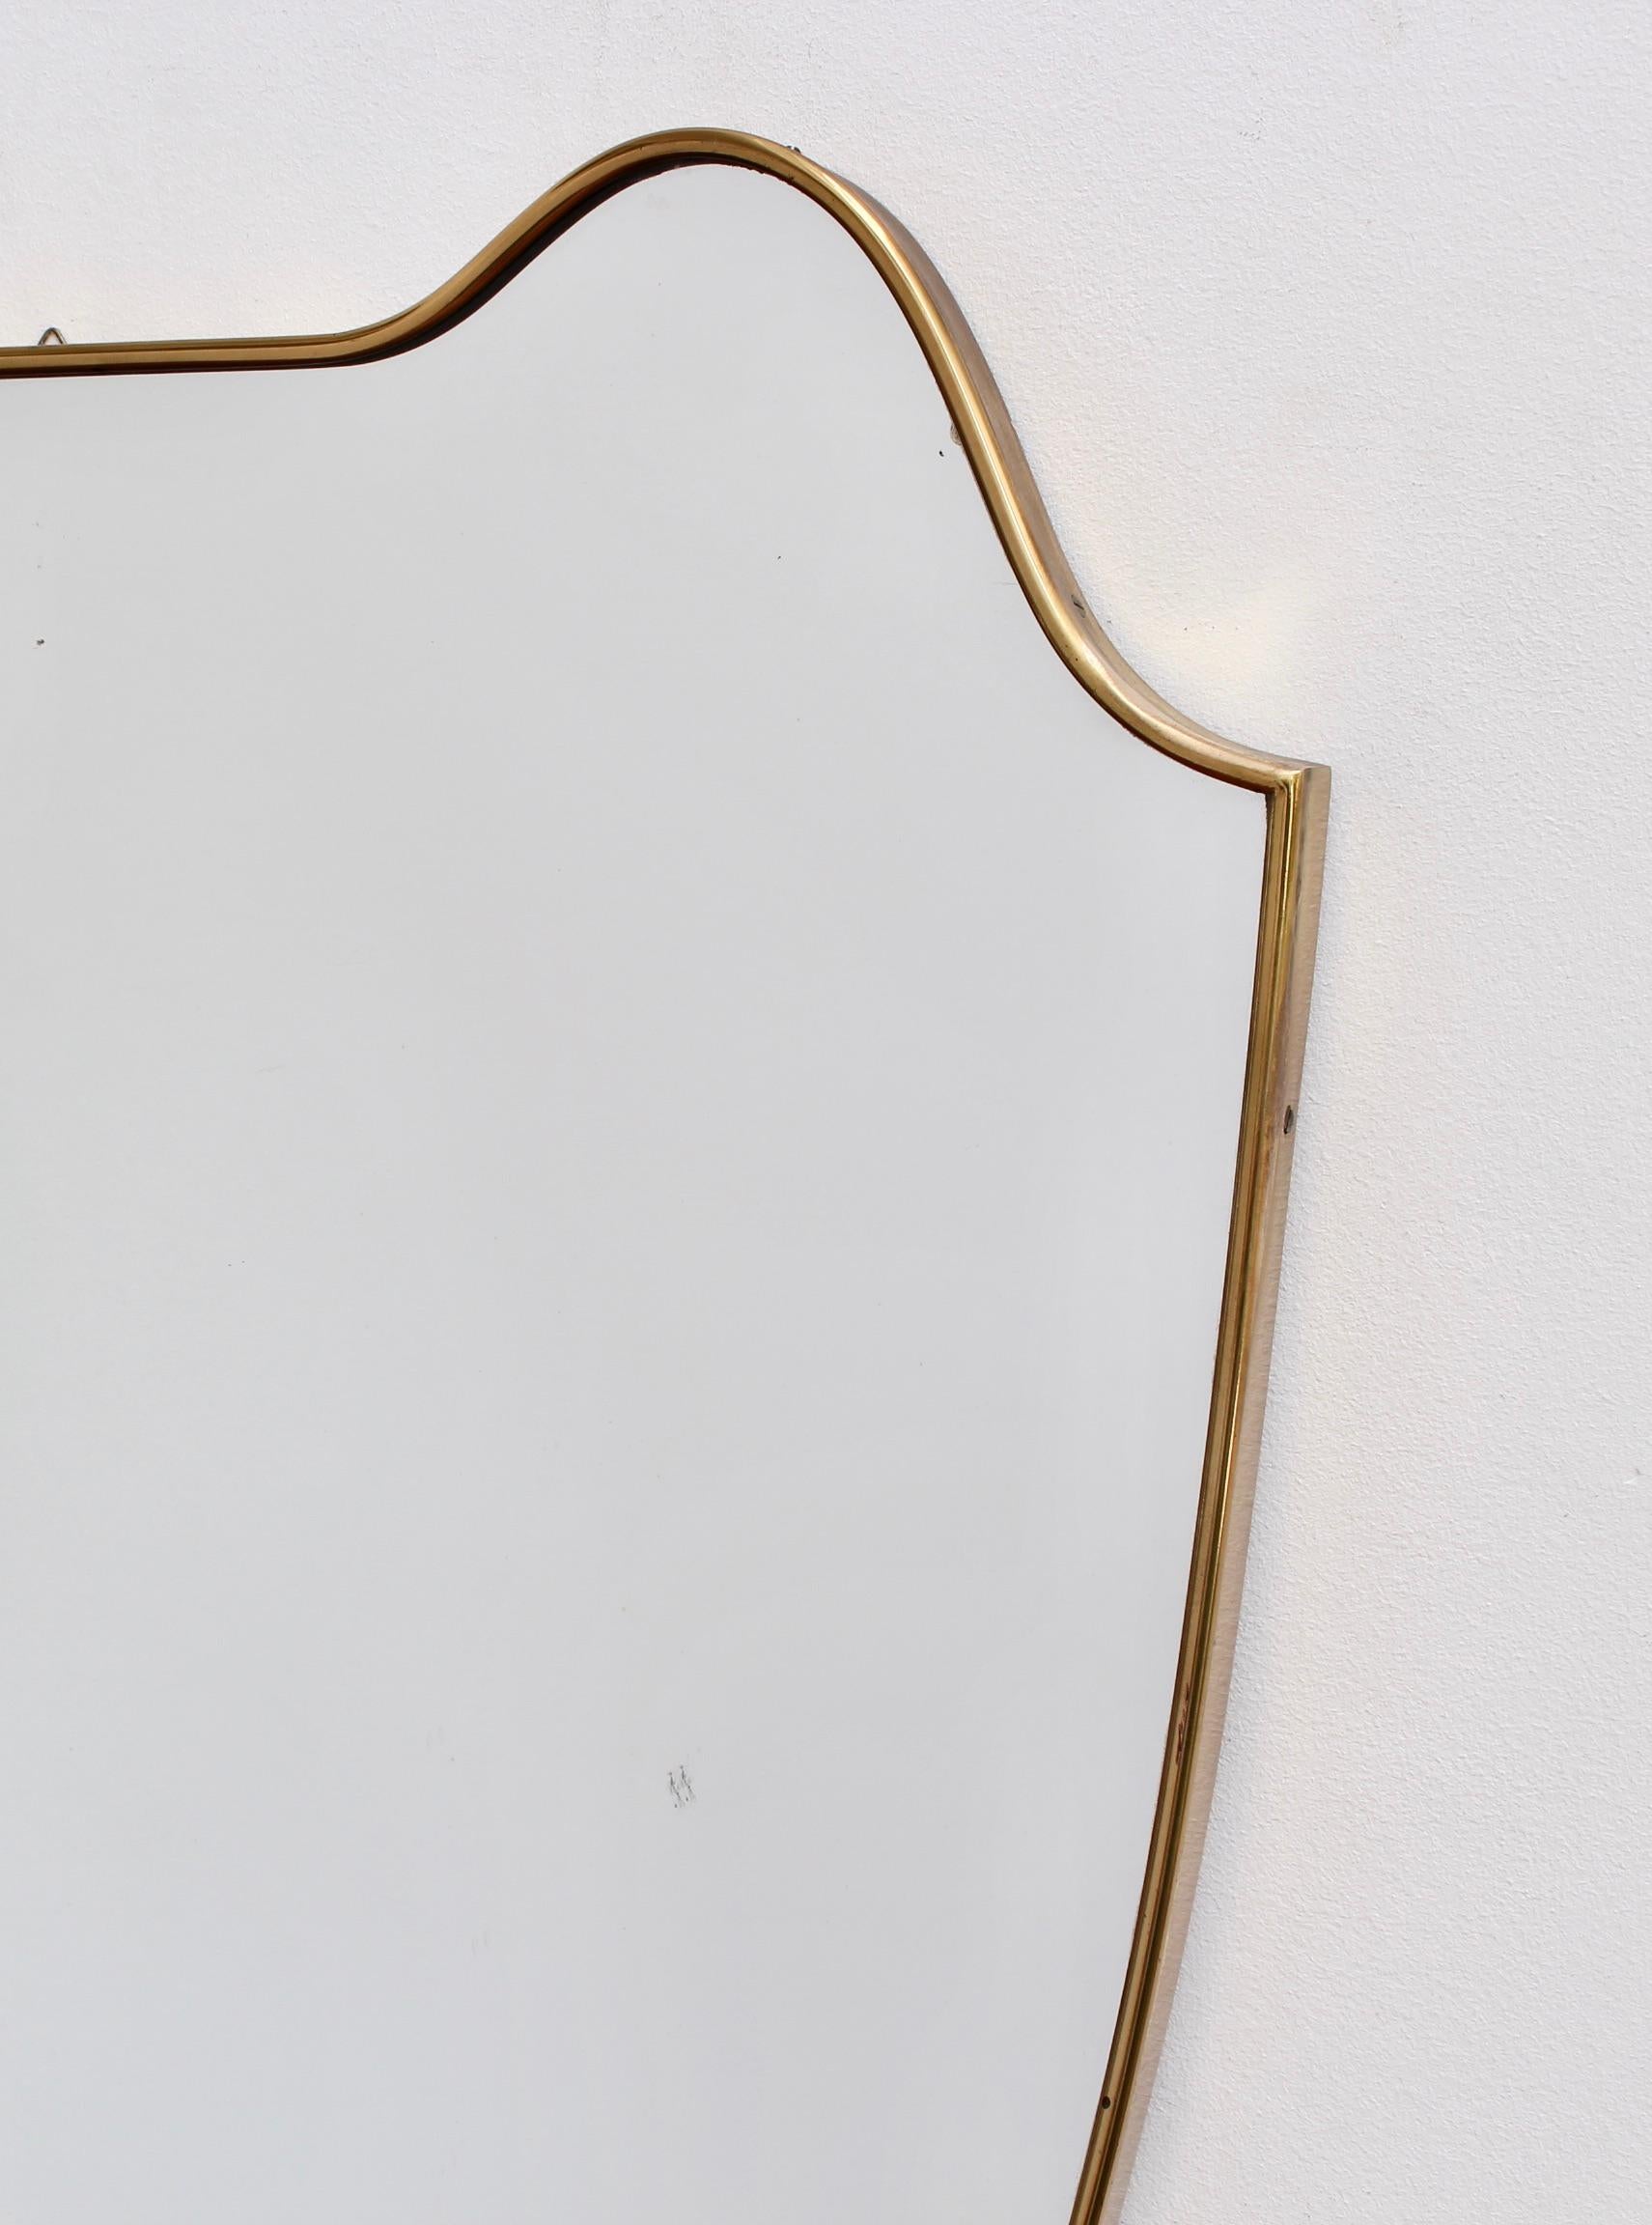 Mid-20th Century Midcentury Eared Crest-Shaped Italian Wall Mirror with Brass Frame, circa 1950s